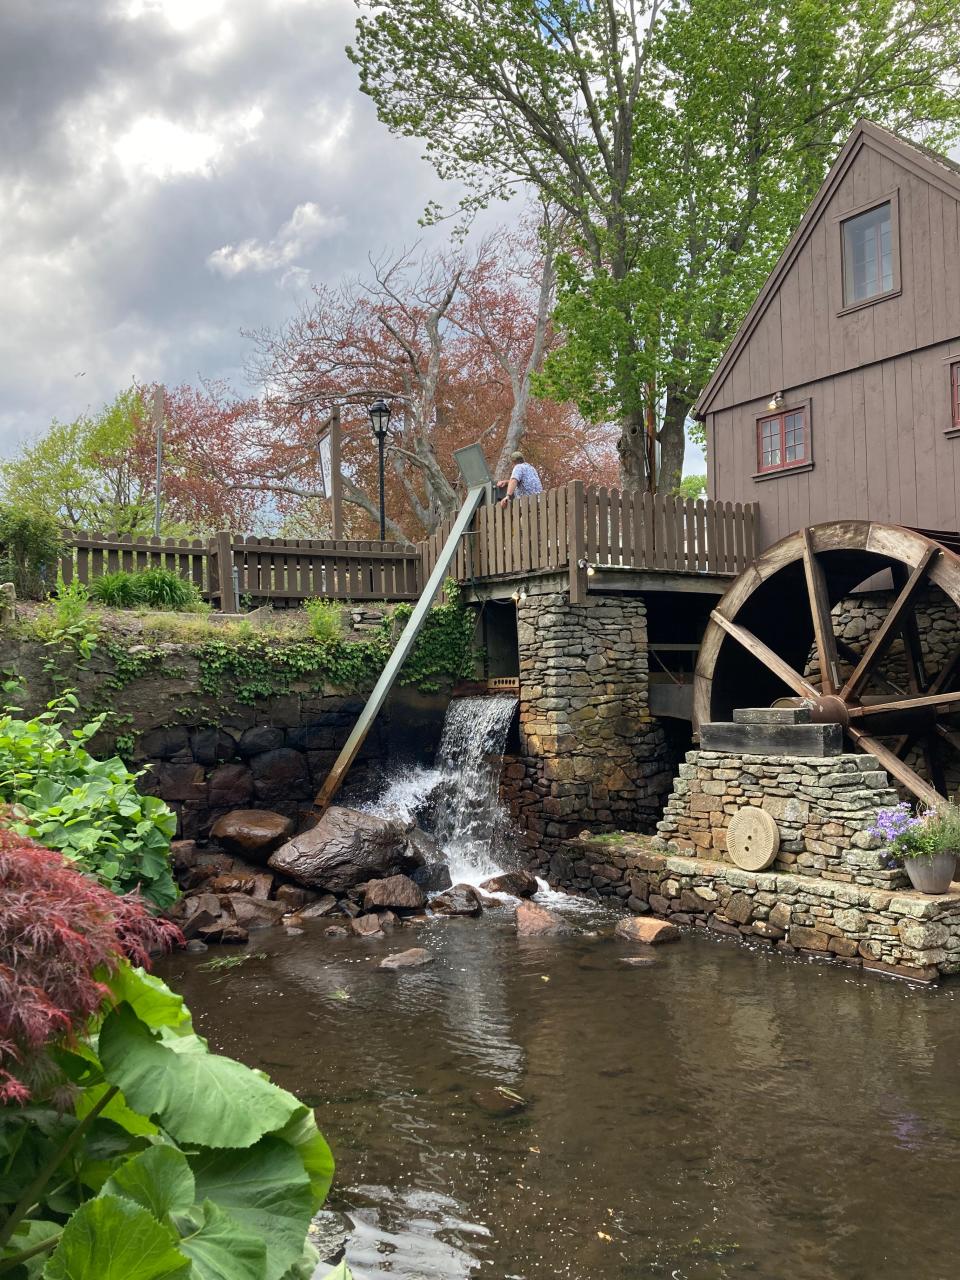 The town installed an eel ladder at Plimoth Grist Mill in 2019.